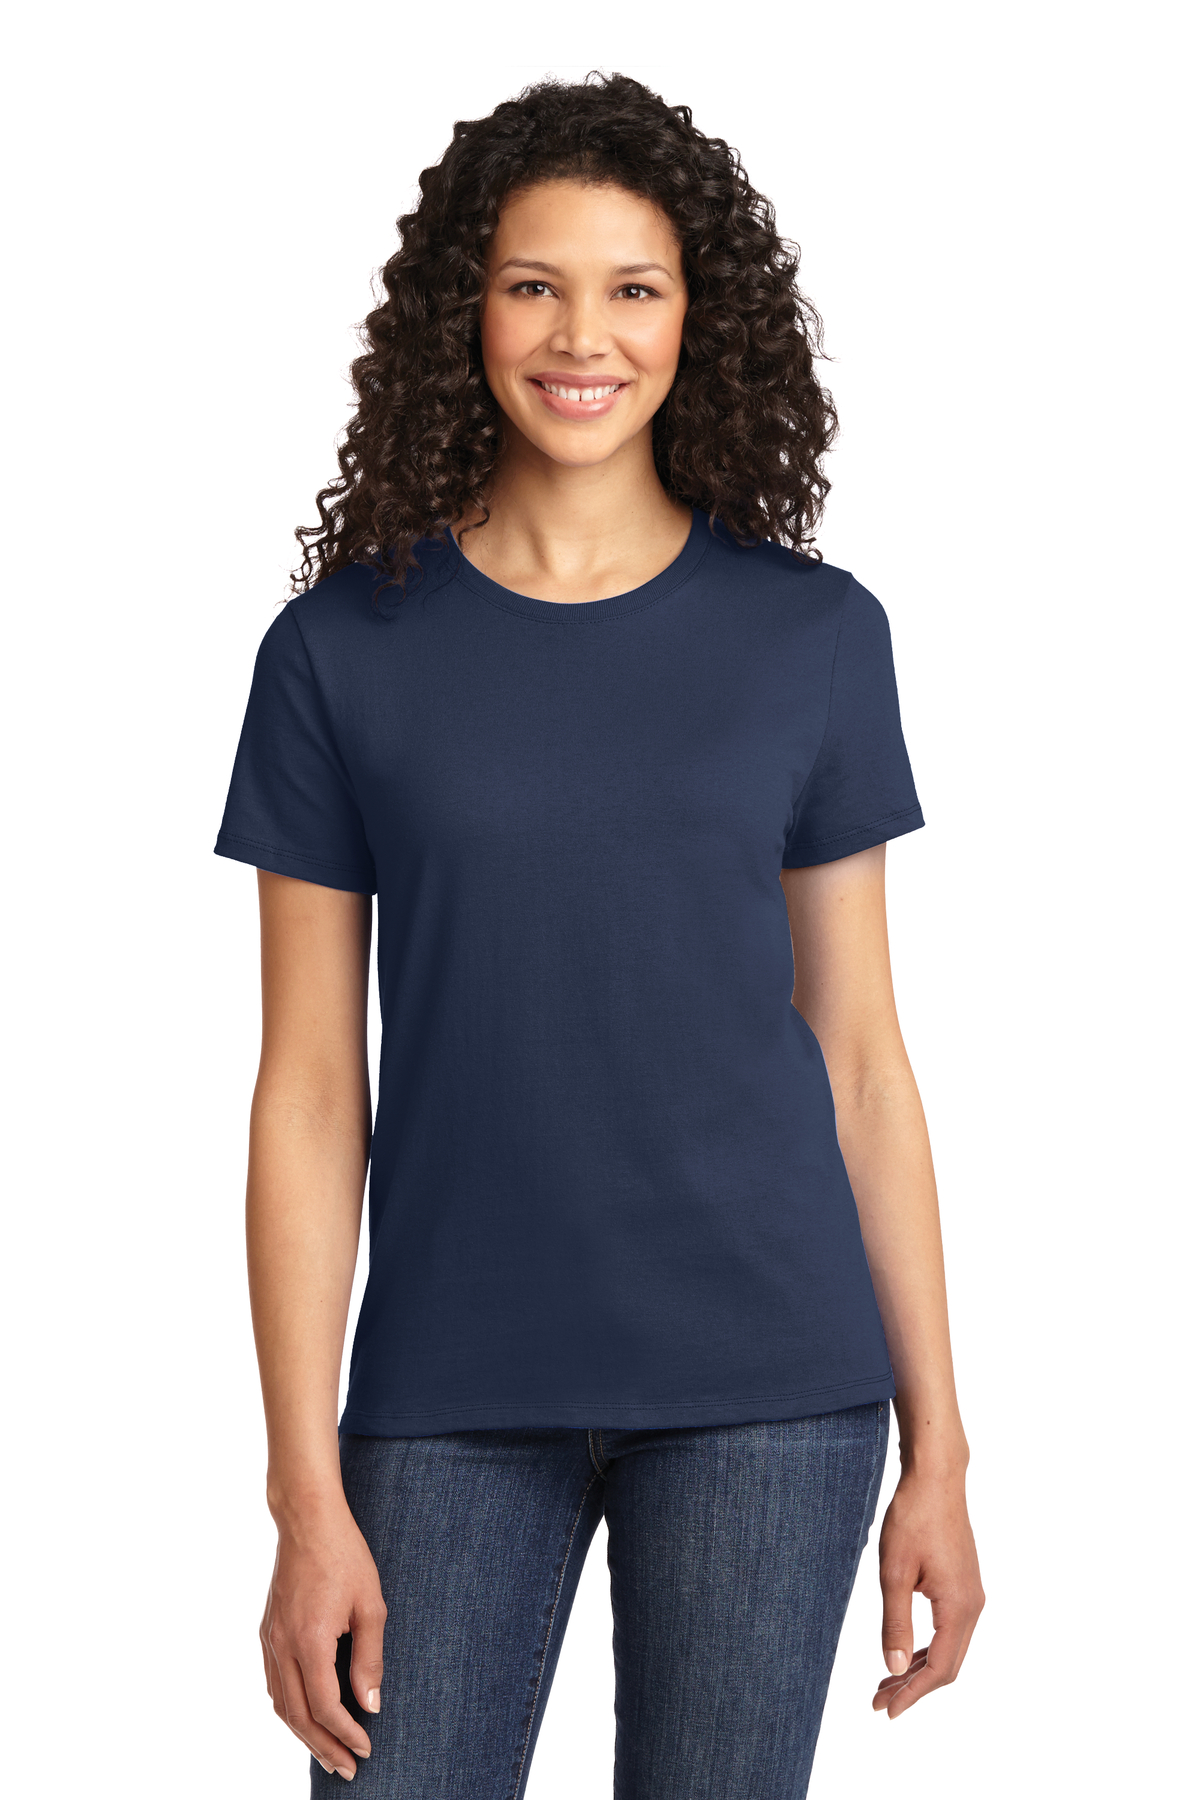 Port & Company Printed Women's Essential Tee | T-Shirts - Queensboro